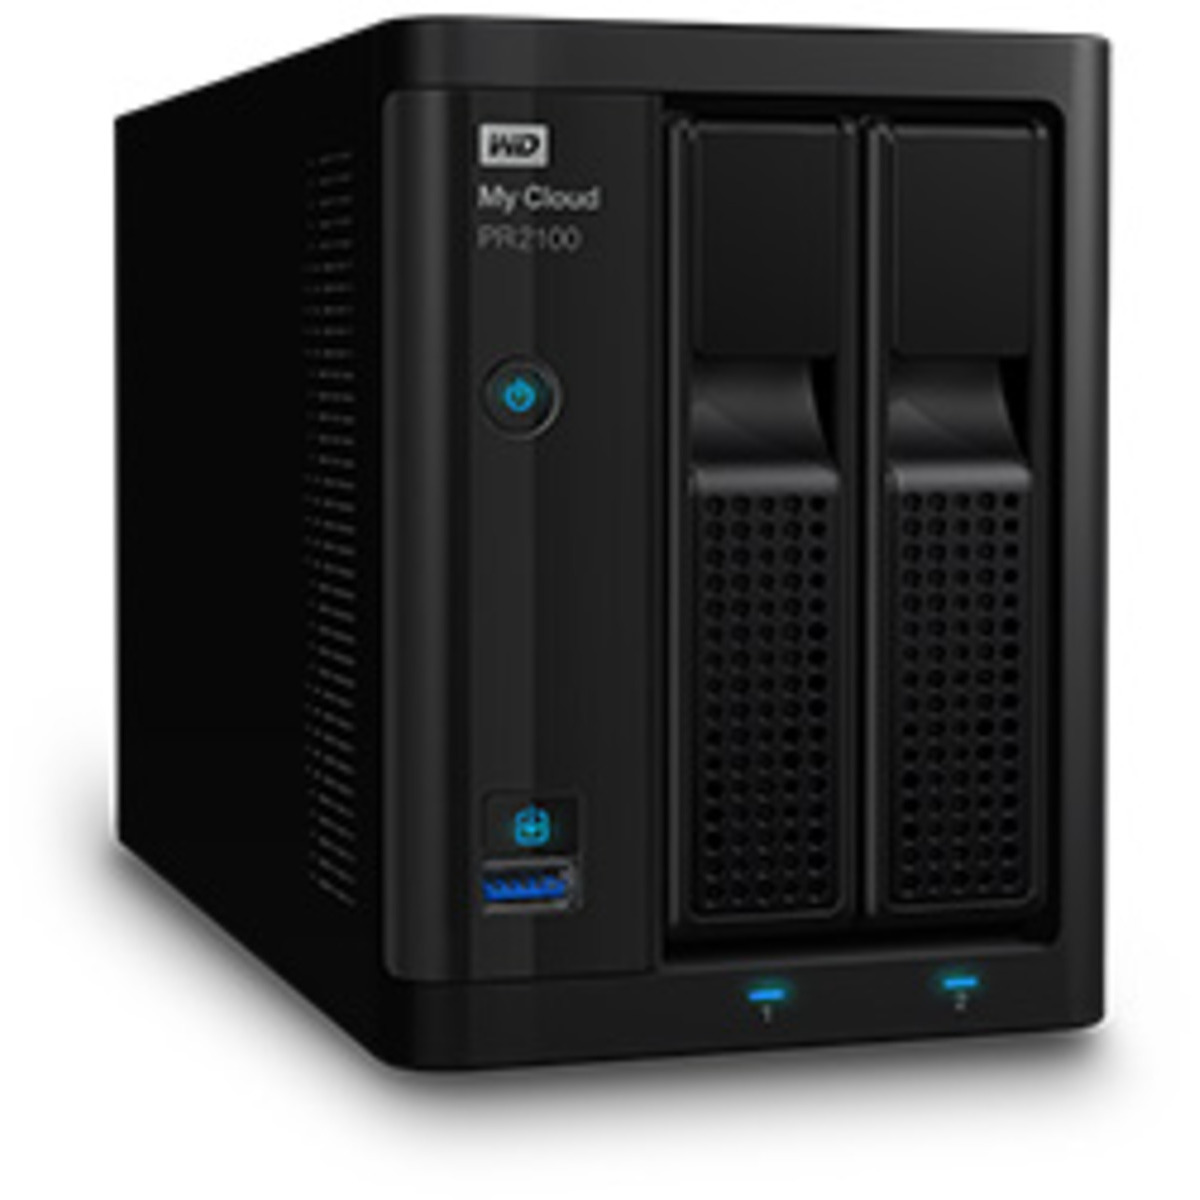 Western Digital My Cloud Pro PR2100 2tb 2-Bay Desktop Multimedia / Power User / Business NAS - Network Attached Storage Device 2x1tb Western Digital Red SA500 WDS100T1R0A 2.5 560/530MB/s SATA 6Gb/s SSD NAS Class Drives Installed - Burn-In Tested My Cloud Pro PR2100